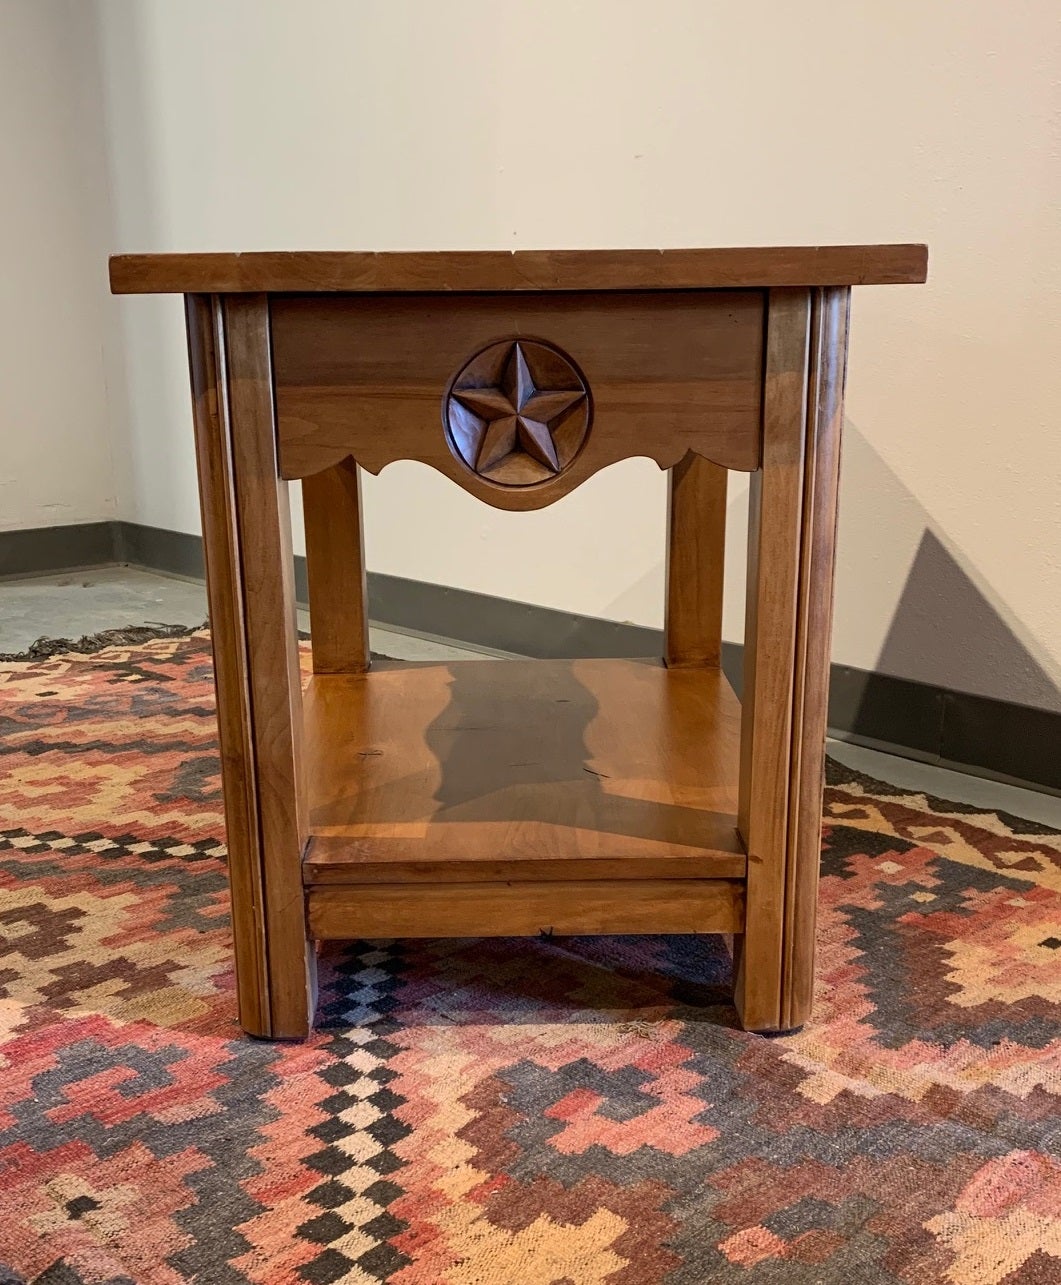 The Ranger End Table is the perfect compliment to a Country or Southwestern Decorated Room. Hand carved star on drawer front. Made in Alder with Cognac finish.

Showroom floor model that shows some use.